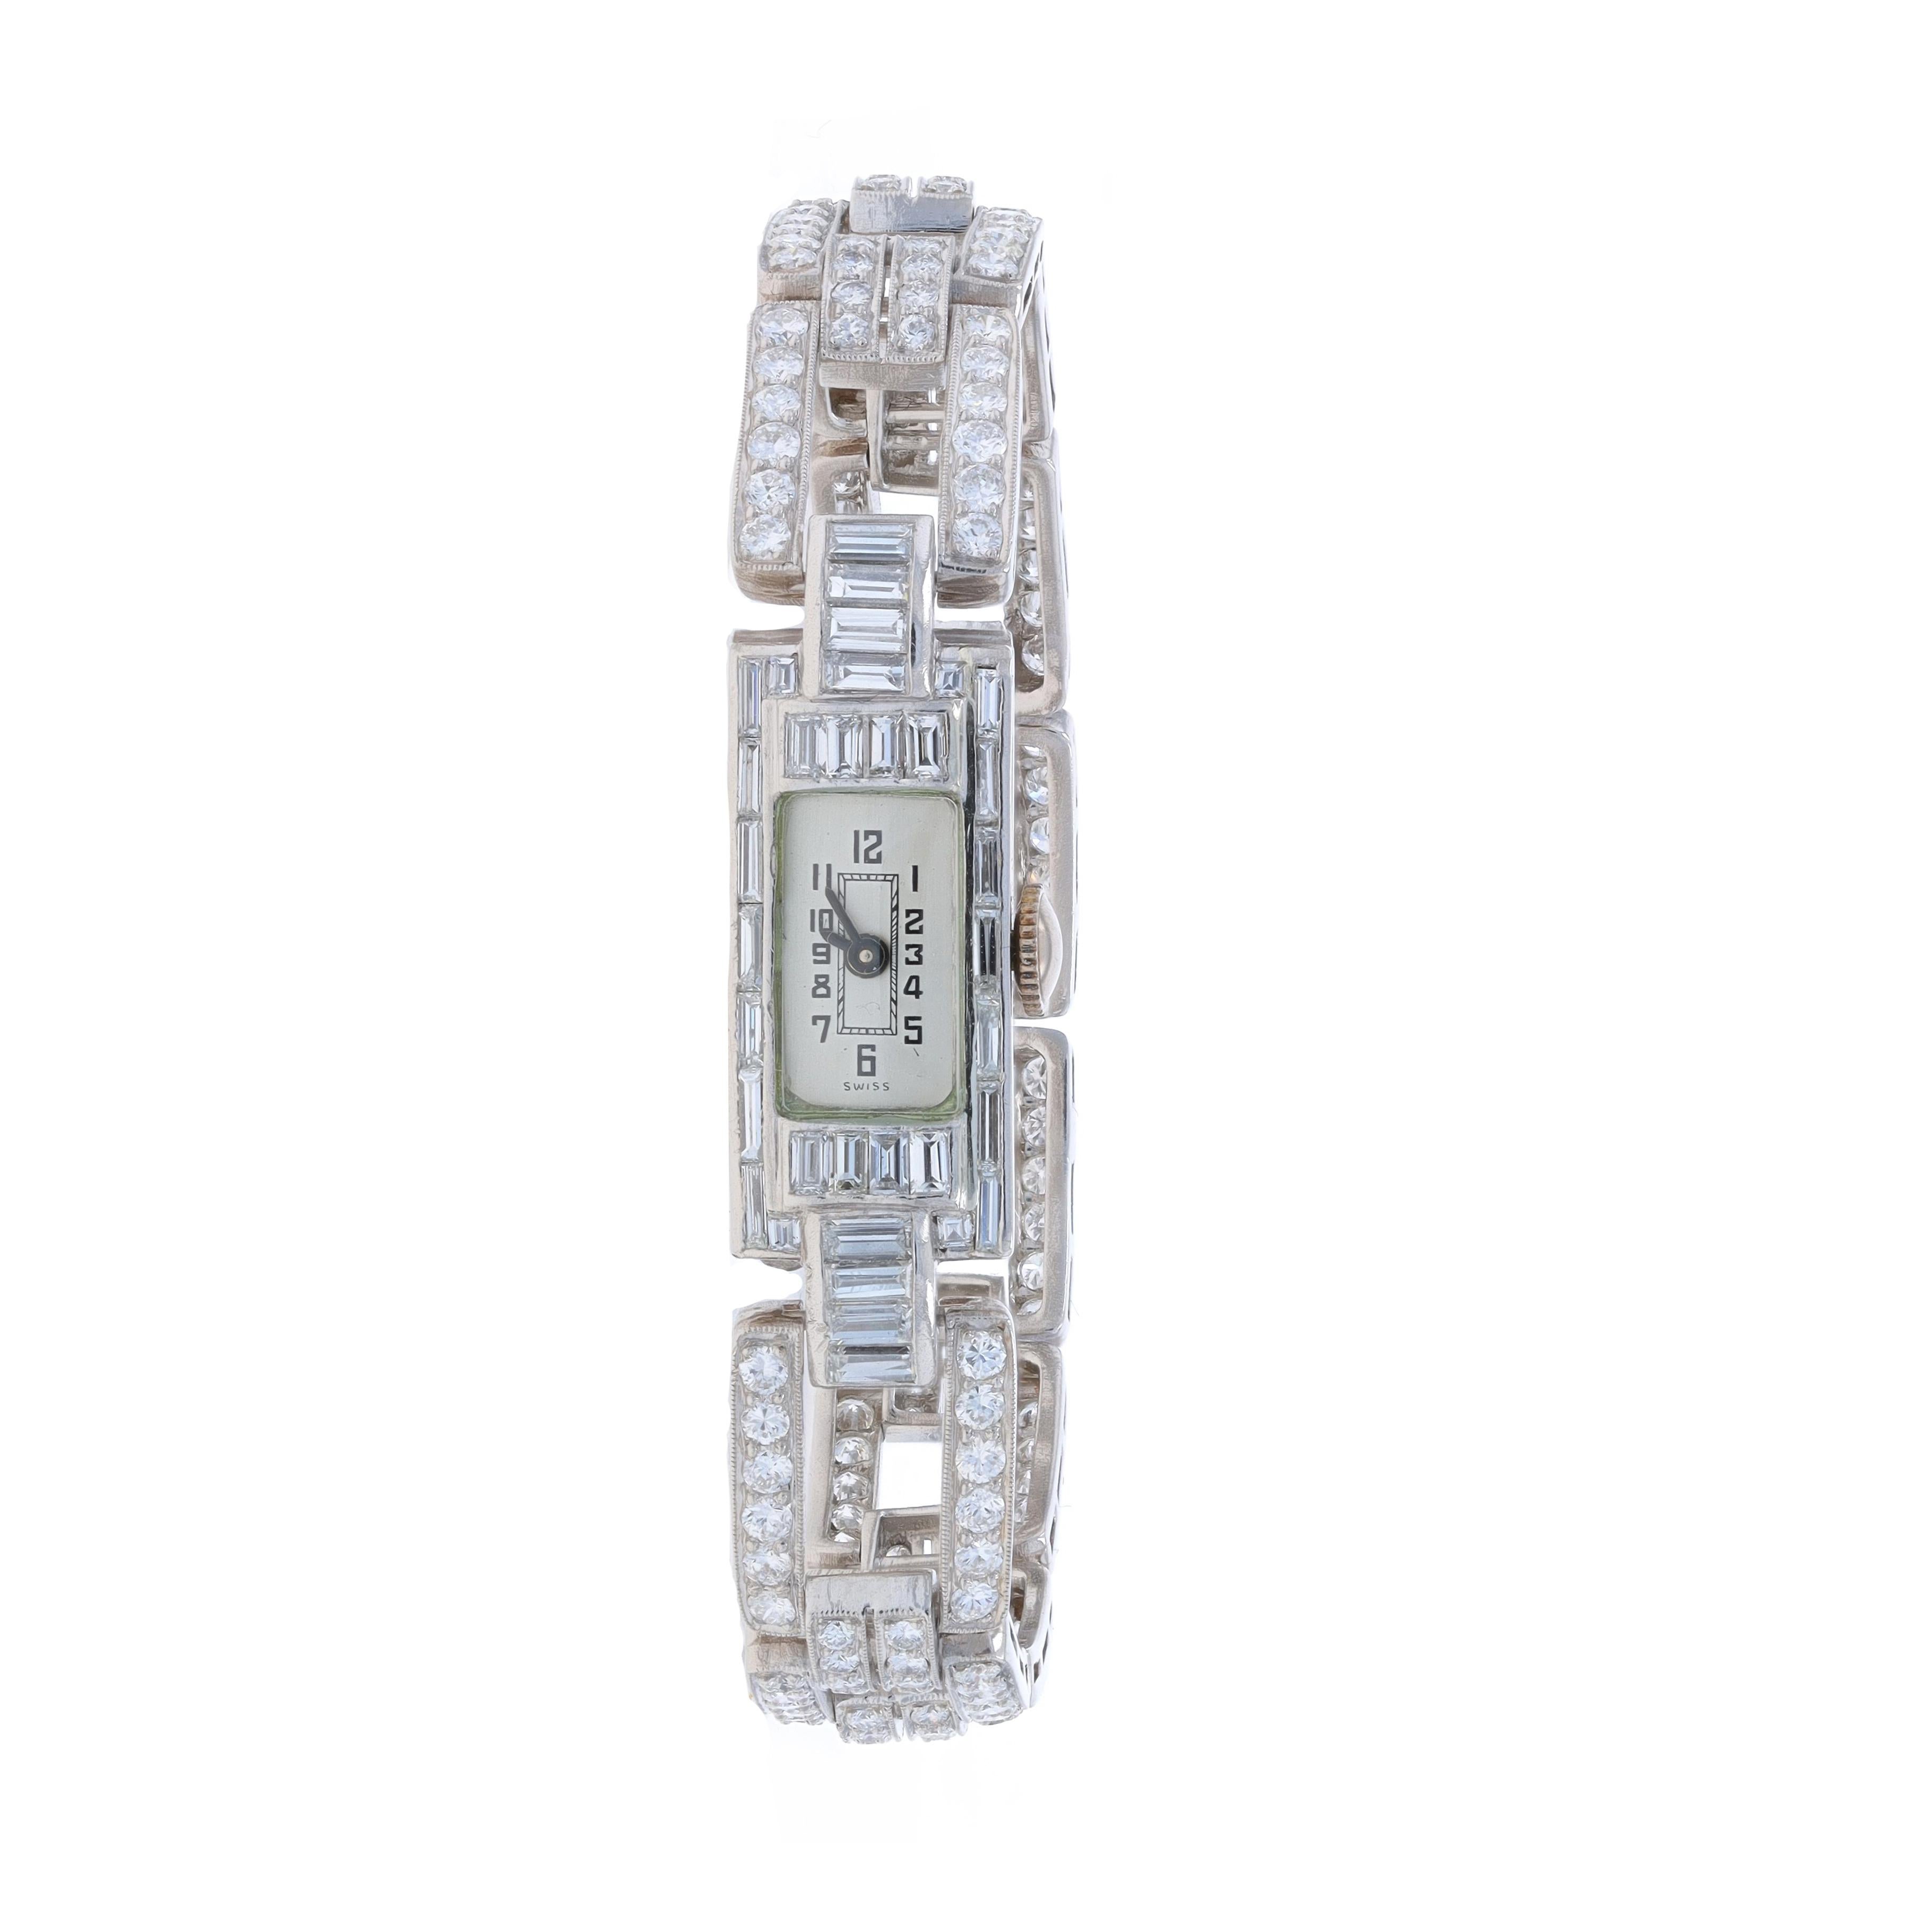 Brand: Longines
Number of Jewels: 17
Warranty: One Year
Era: Vintage
Date: 1950s - 1960s
Movement Maker: Swiss
Dial Color: Silver

Metal Content: Platinum

Stone Information
Natural Diamonds
Carat(s): 5.20ctw
Cut: Round Brilliant
Color: F -